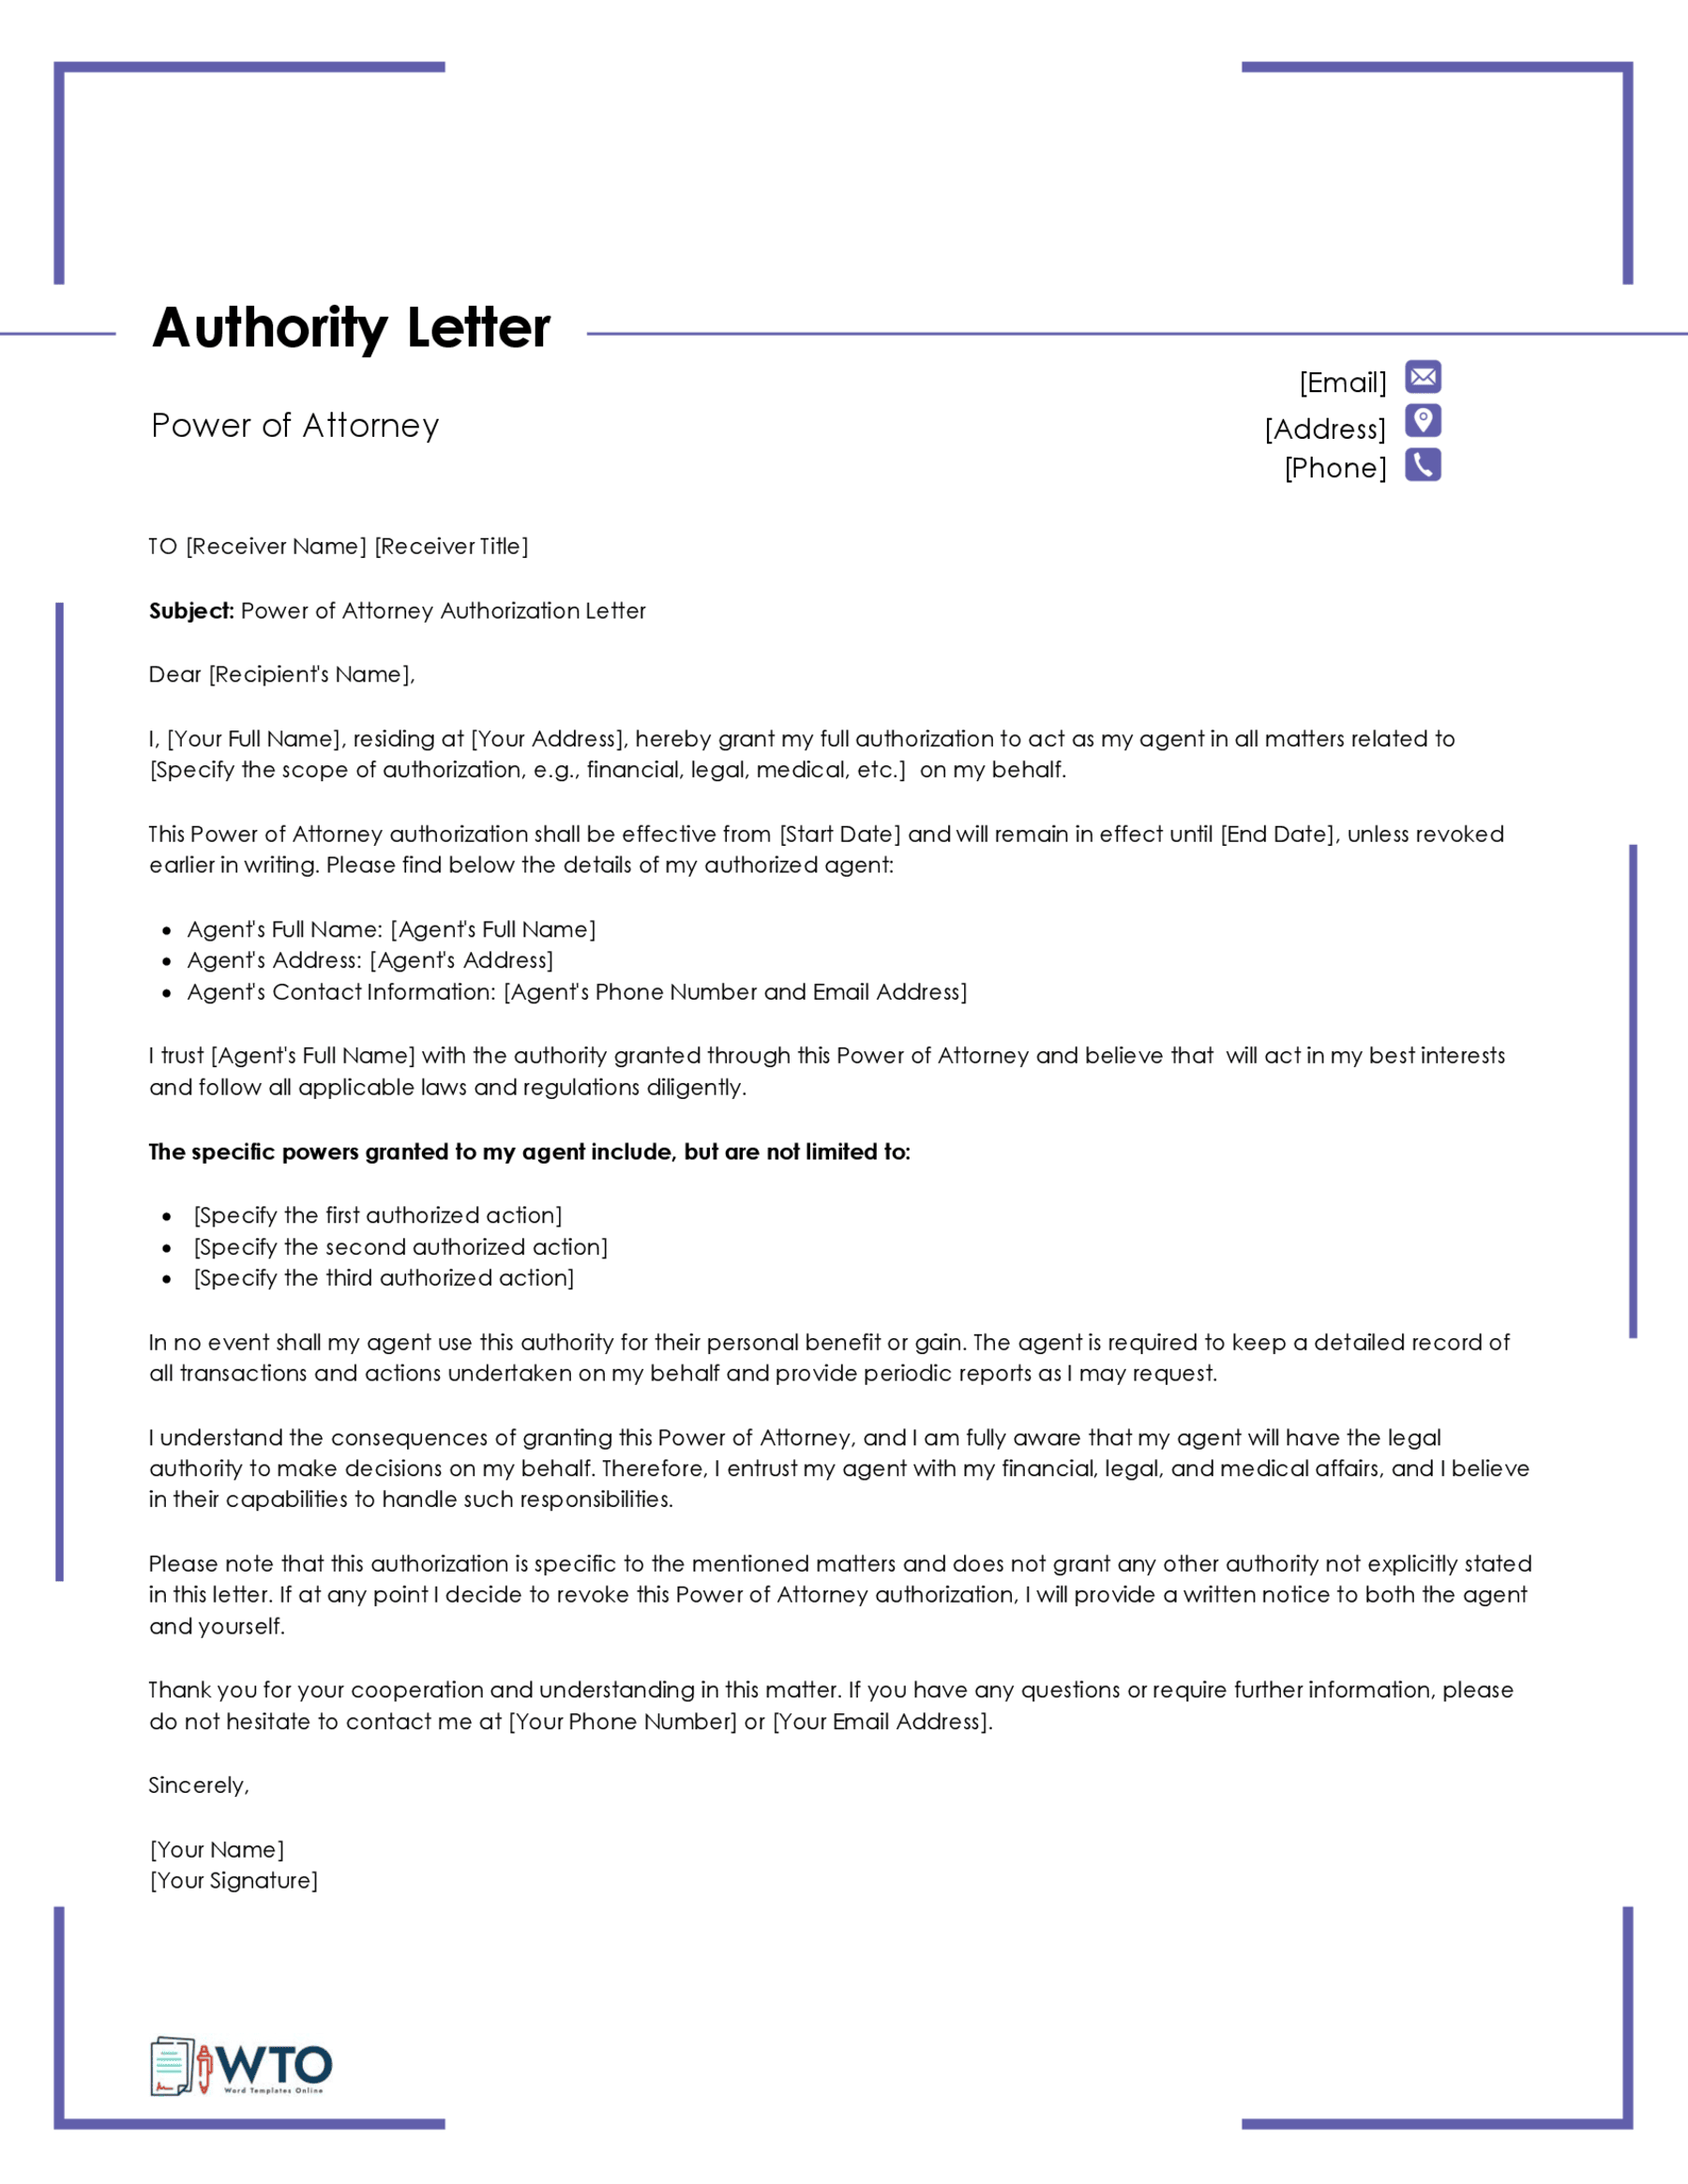 Editable Power of Attorney Authorization Letter Template 04 for Word